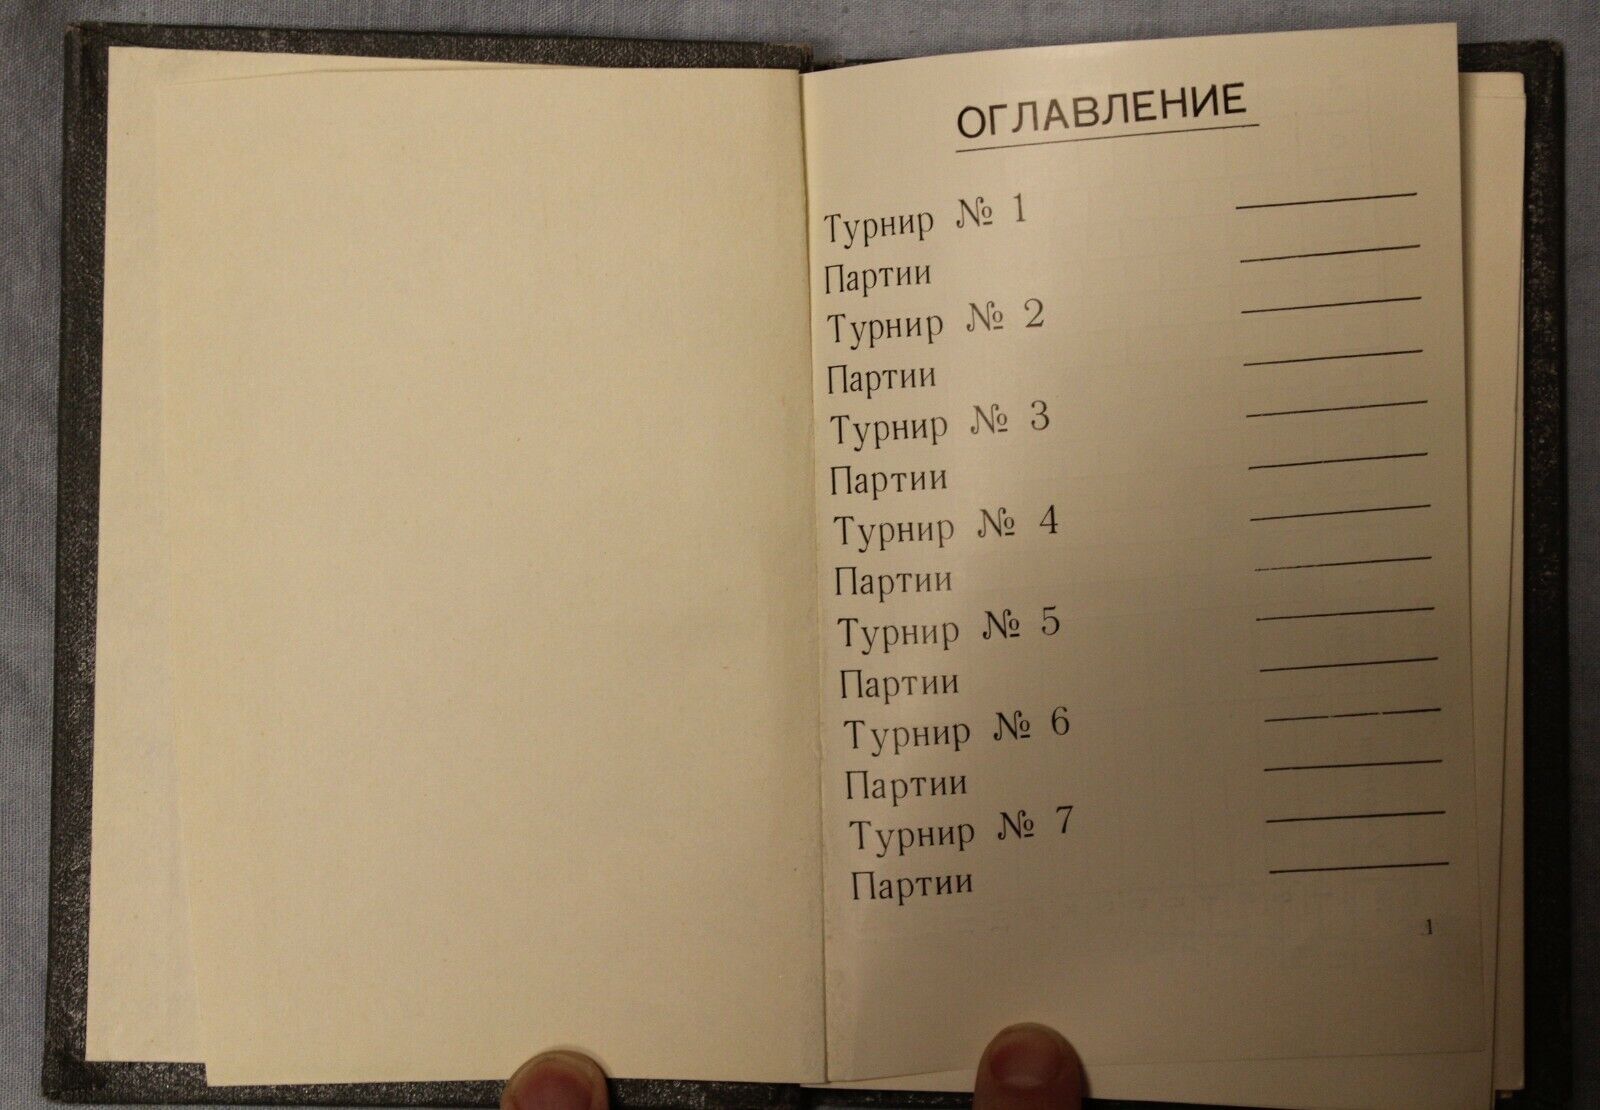 11512.Russian chess book: Chess player's notebook. USSR, 1970s.